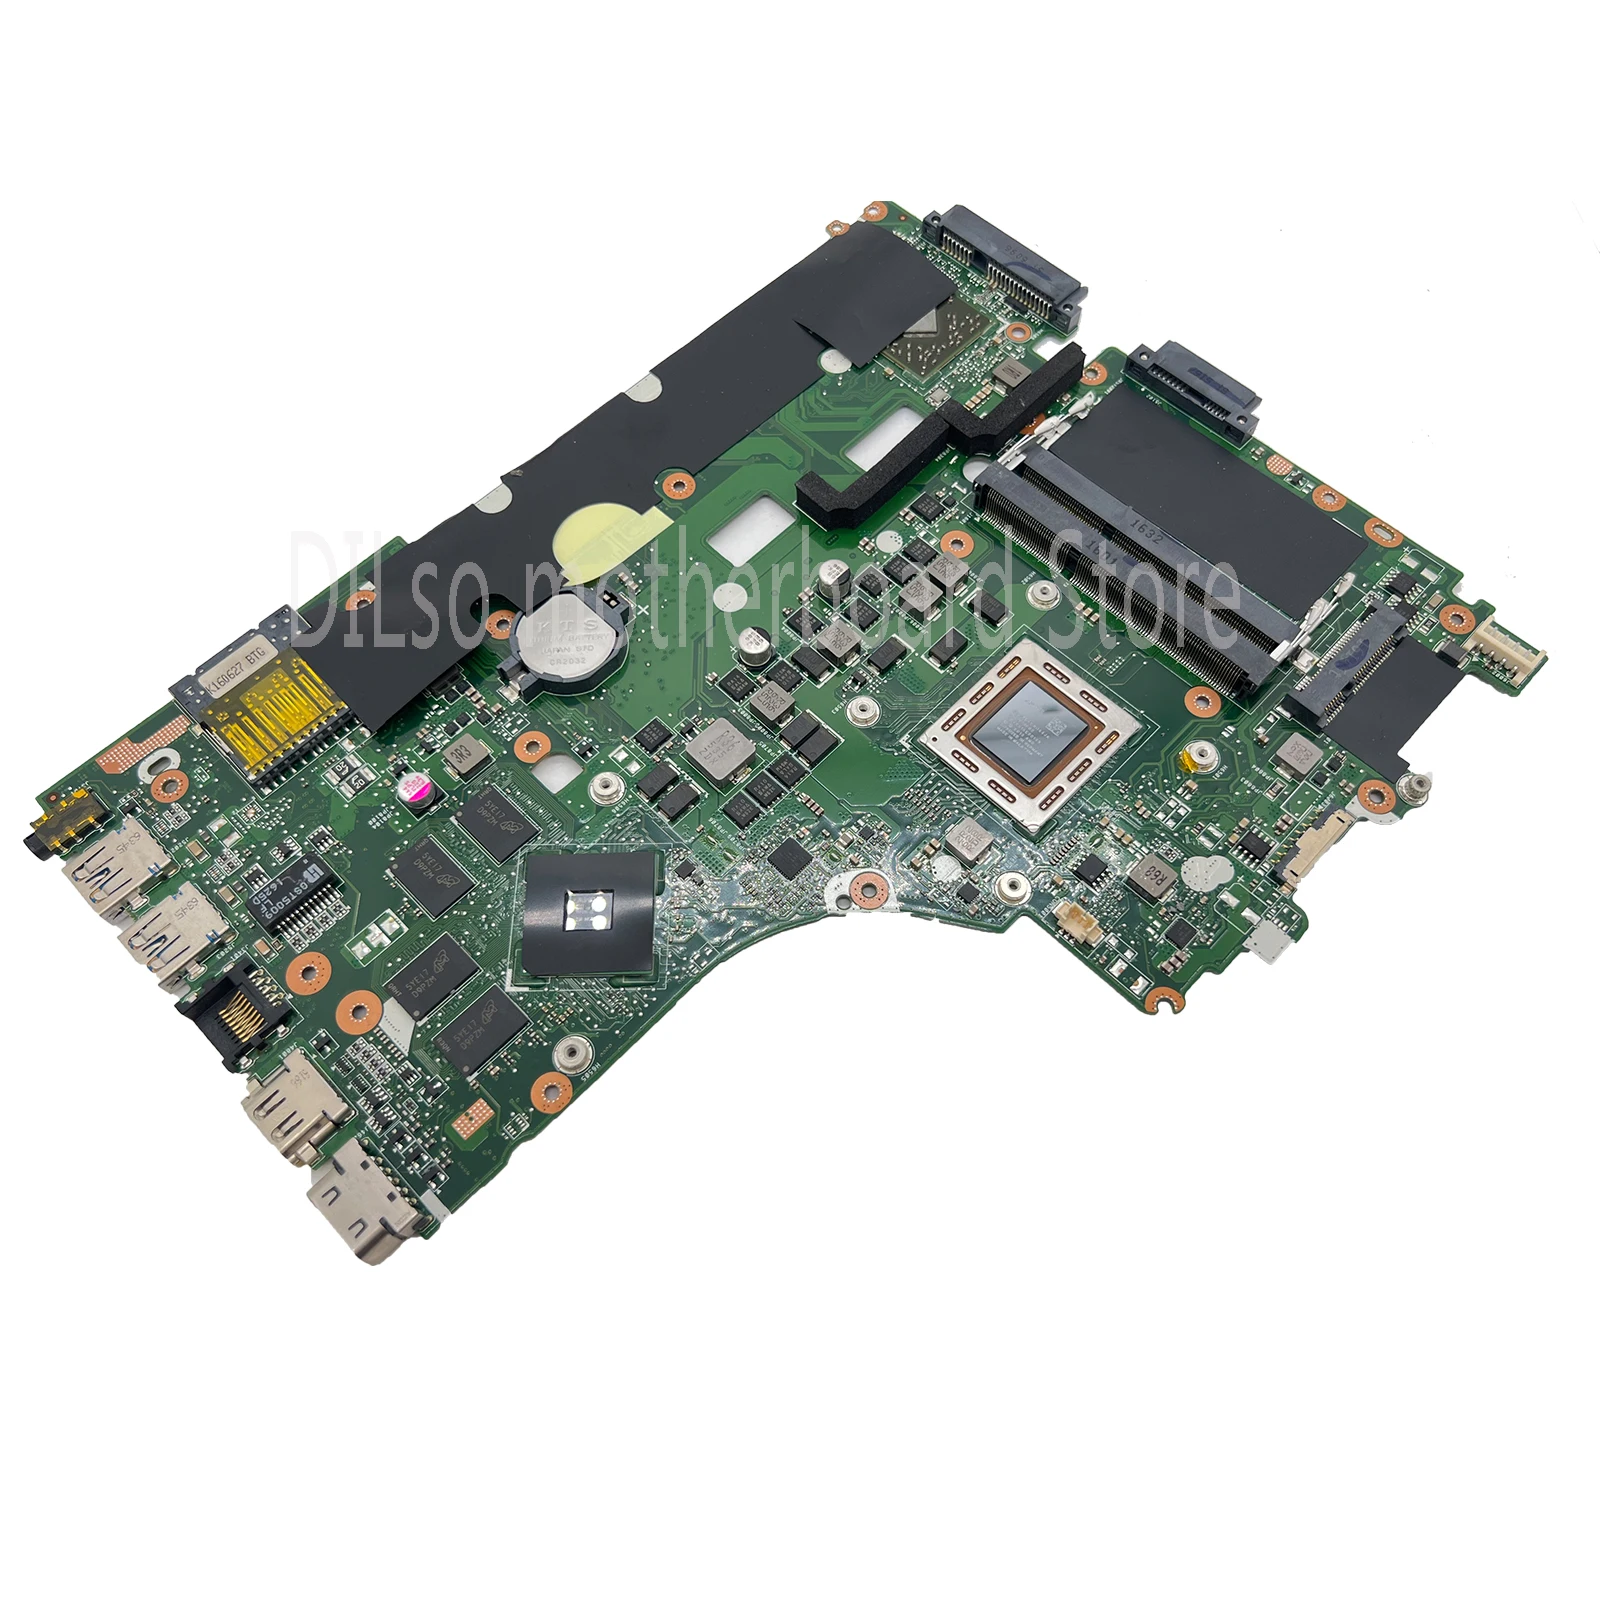 KEFU X550ZE For ASUS VM590Z K550ZE F550ZE A550ZE Laptop Motherboard X550Z Mainboard type1 LVDS OR type2 EDP A8 A10 FX7600P 7500P enlarge